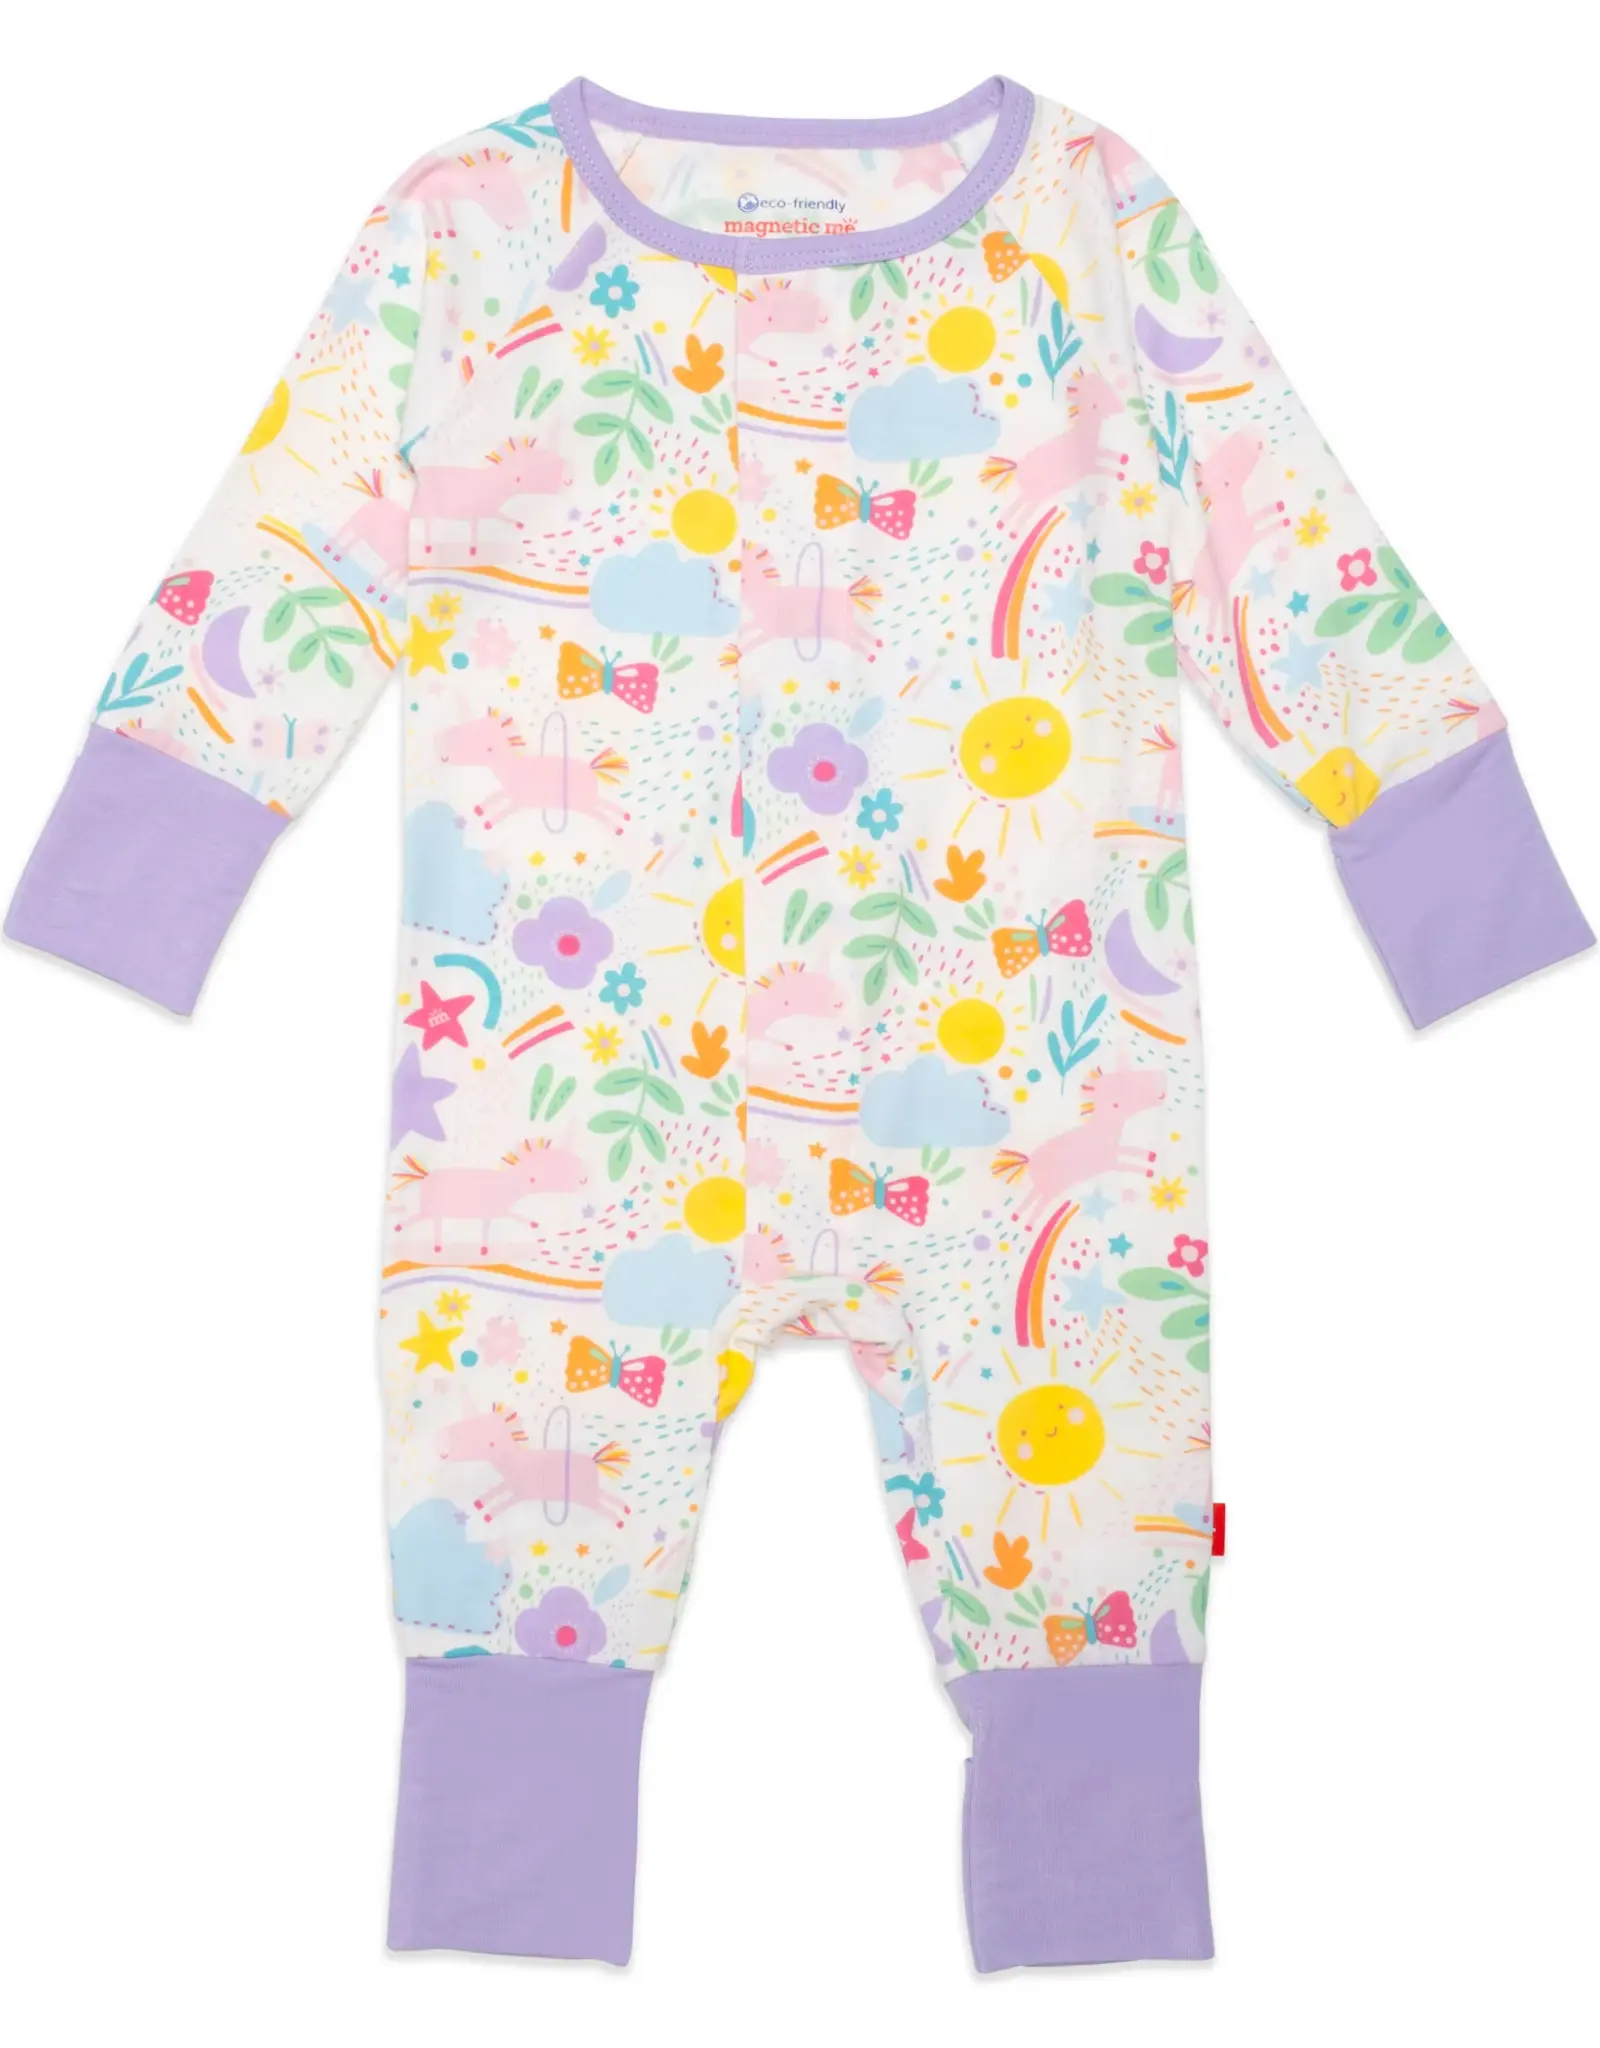 Magnetic Me 6-9MO: Coverall - Sunny Day Vibes Convertible Grow With Me